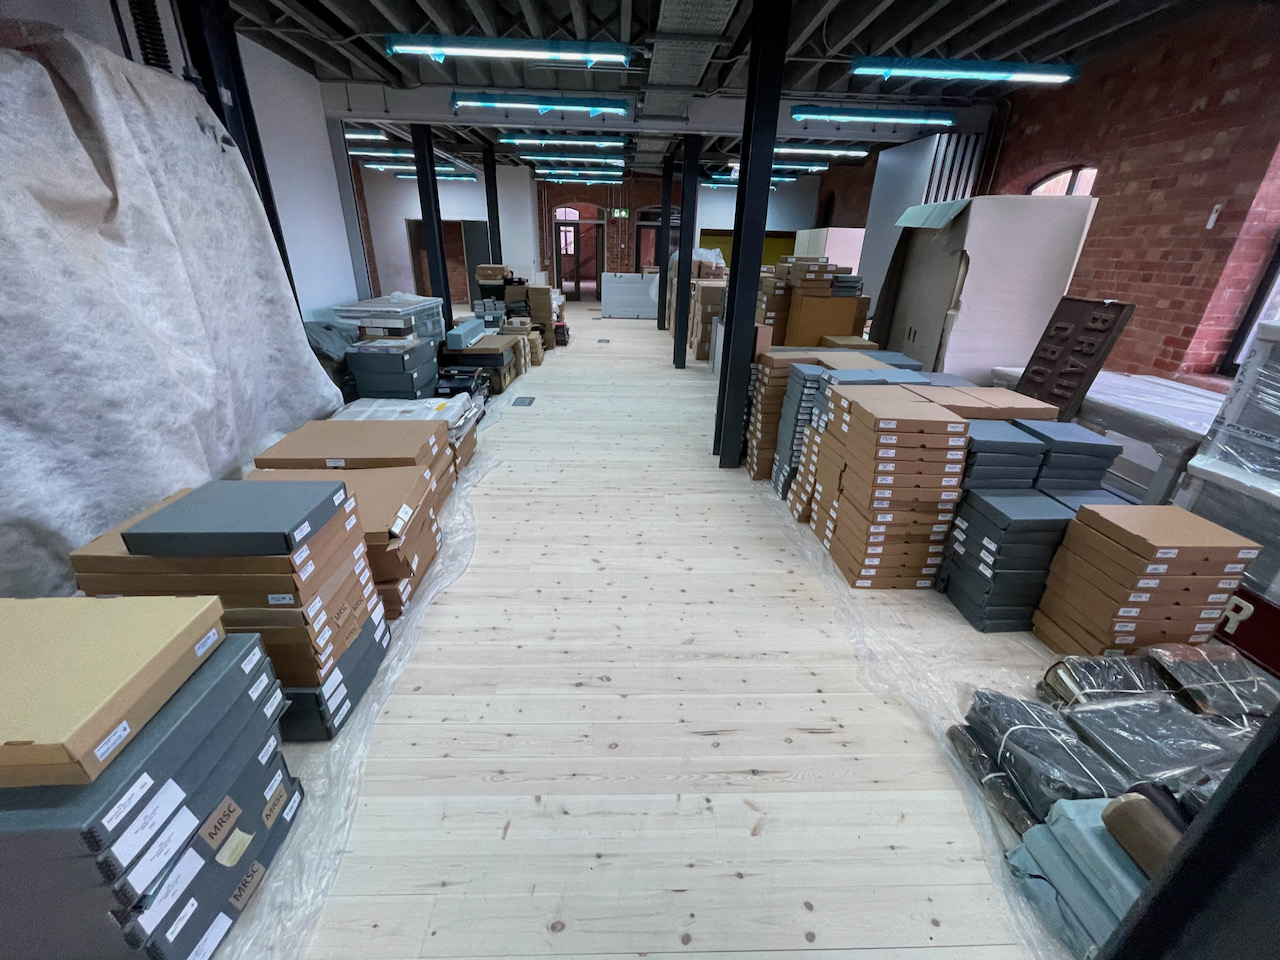 A large space nearly filled with stack and stacks of boxes